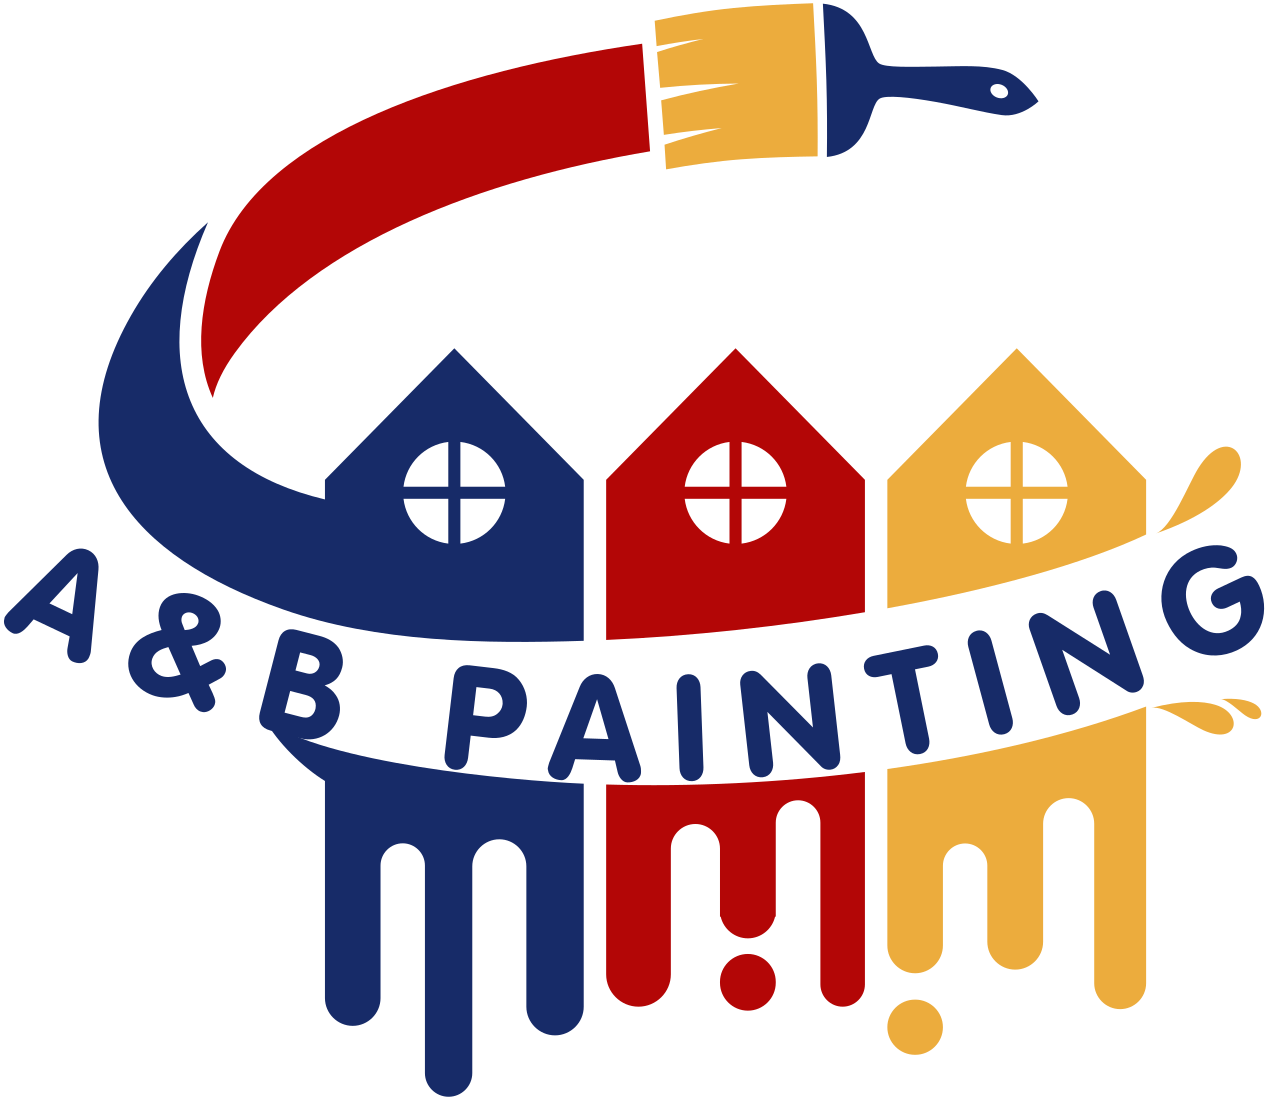 A&B Painting 's logo